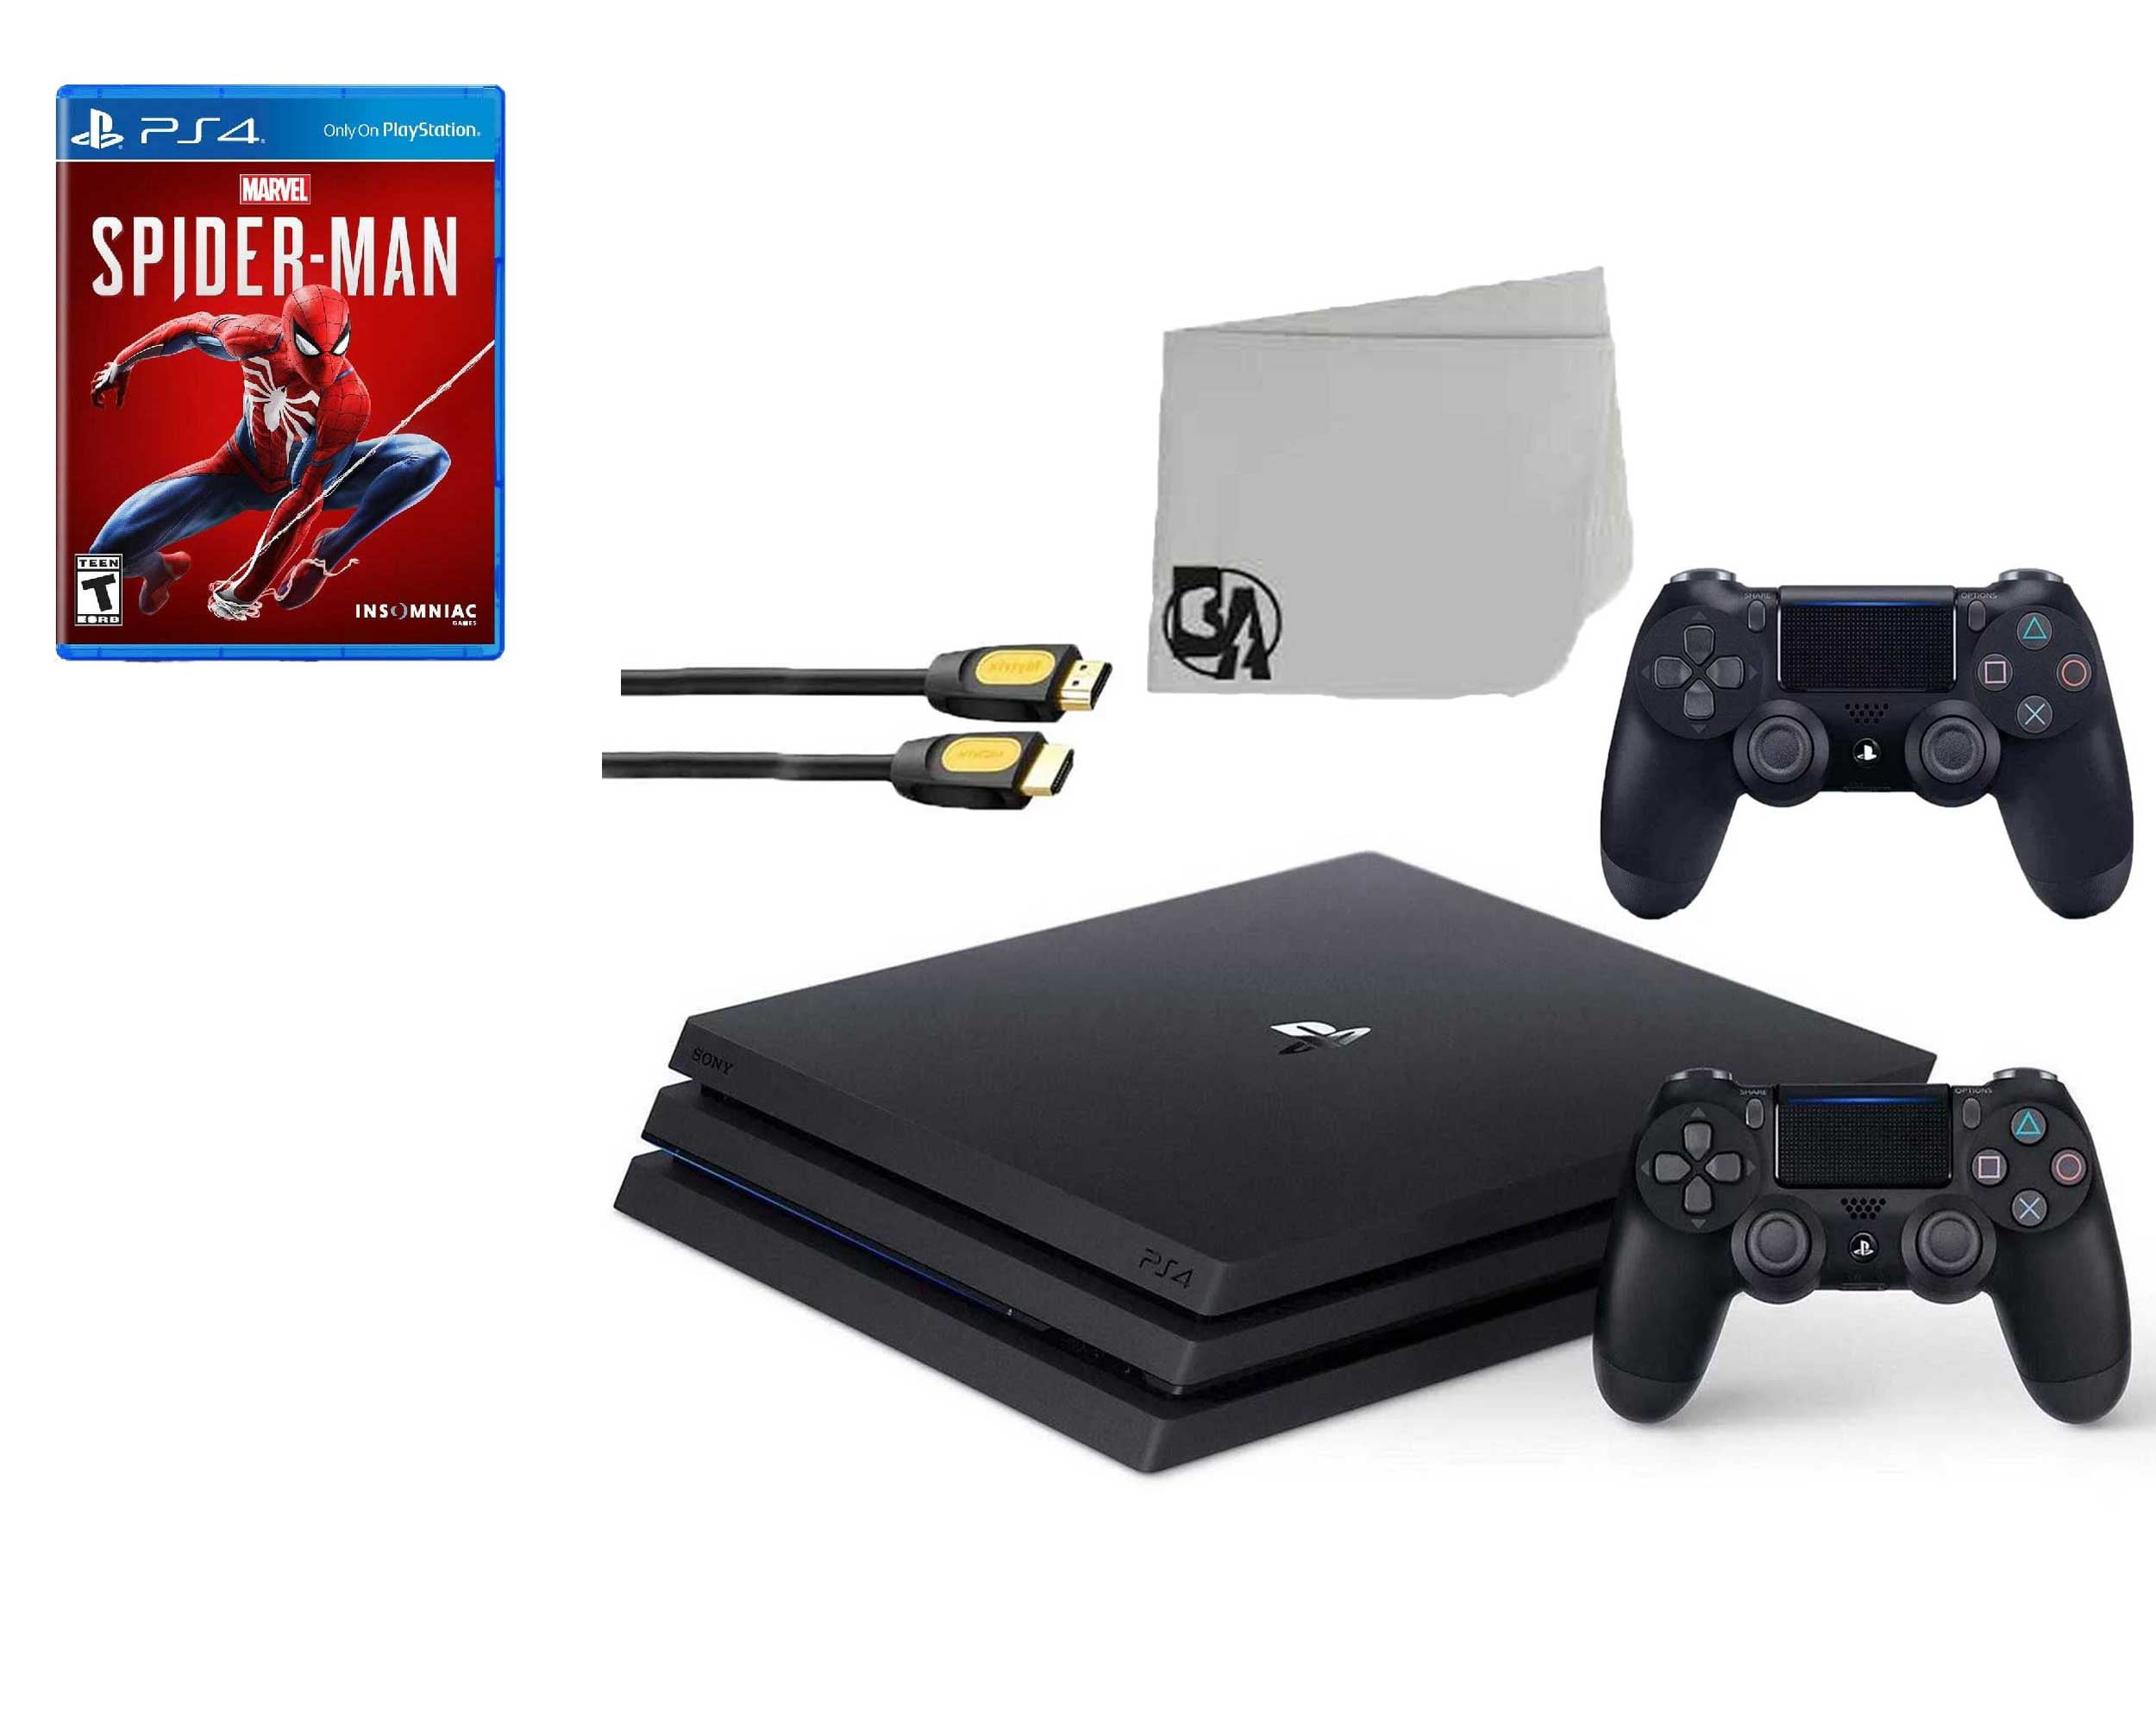 Sony PlayStation 4 Pro 1TB Gaming Console Black 2 Controller Included with  Spider-Man BOLT AXTION Bundle Used